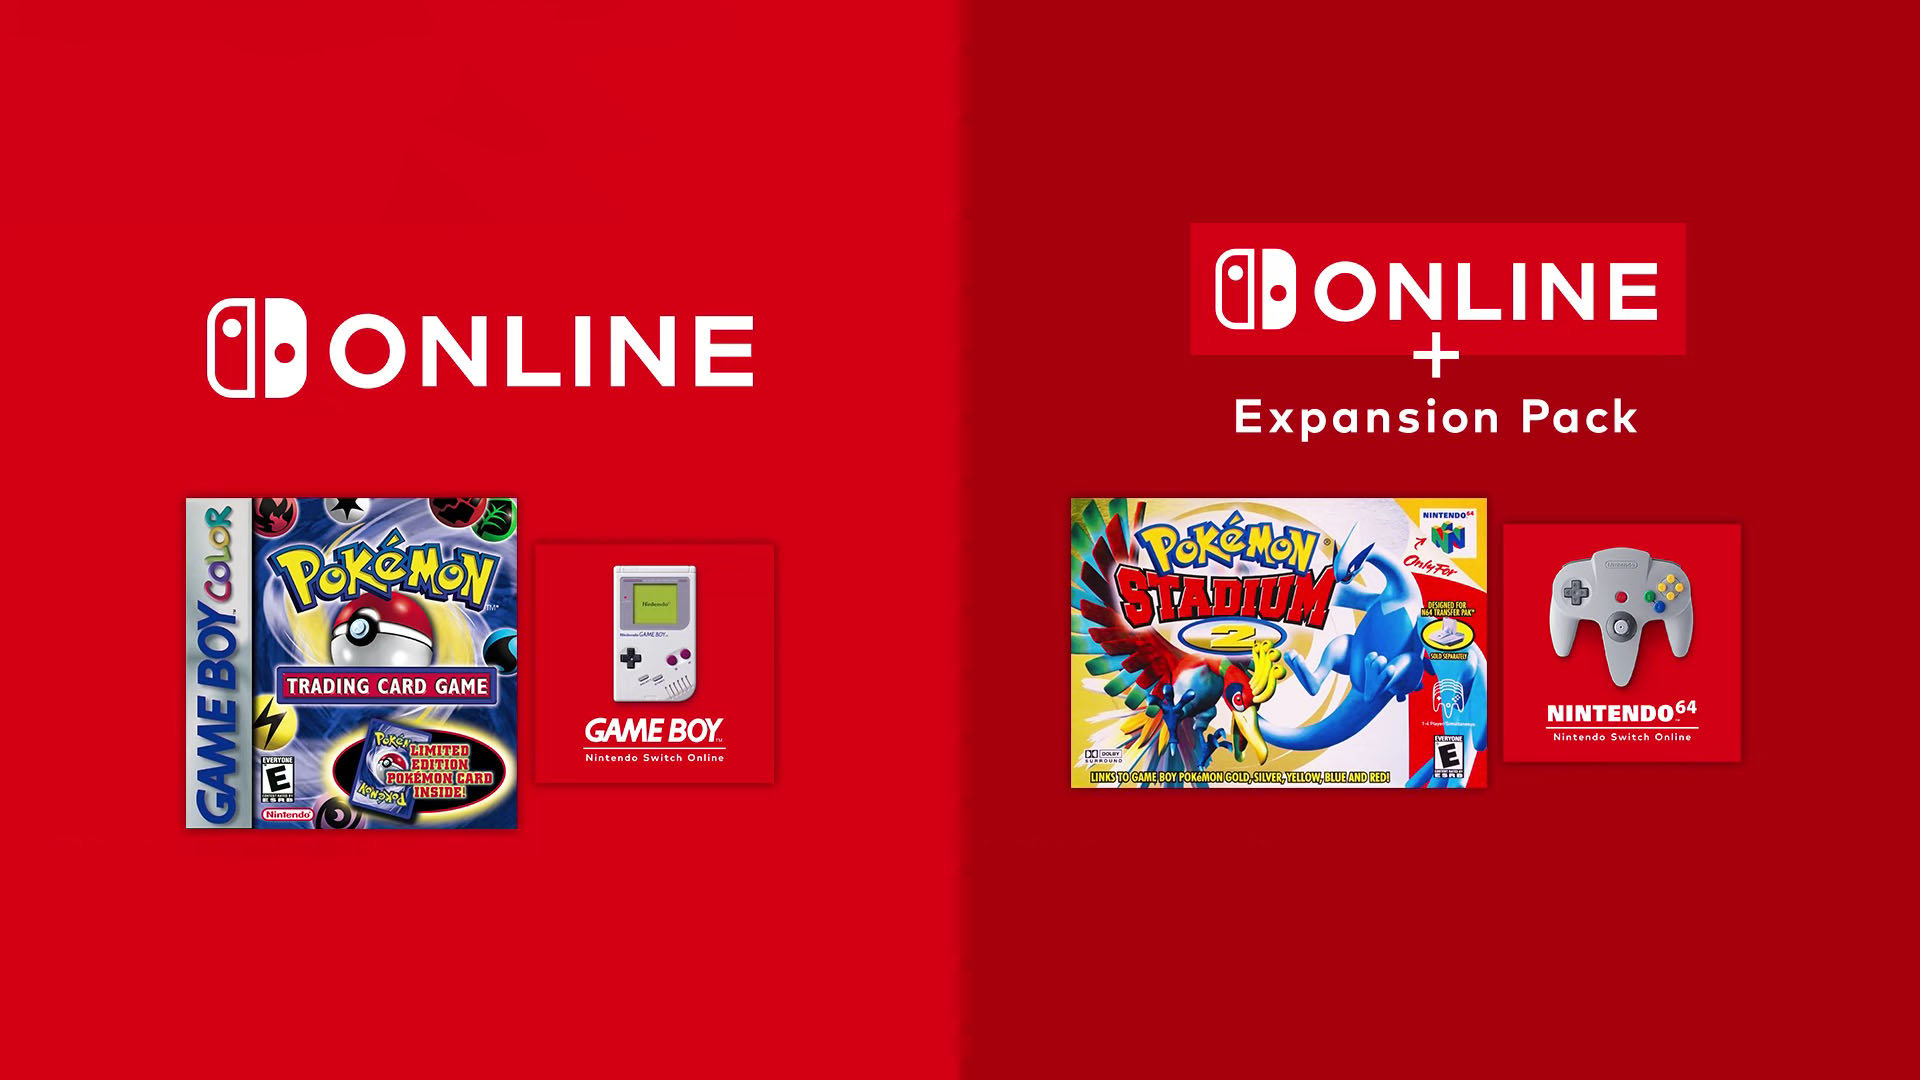 Nintendo Pays Tribute to Pokémon’s Legacy with New Additions to Nintendo Switch Online Membership